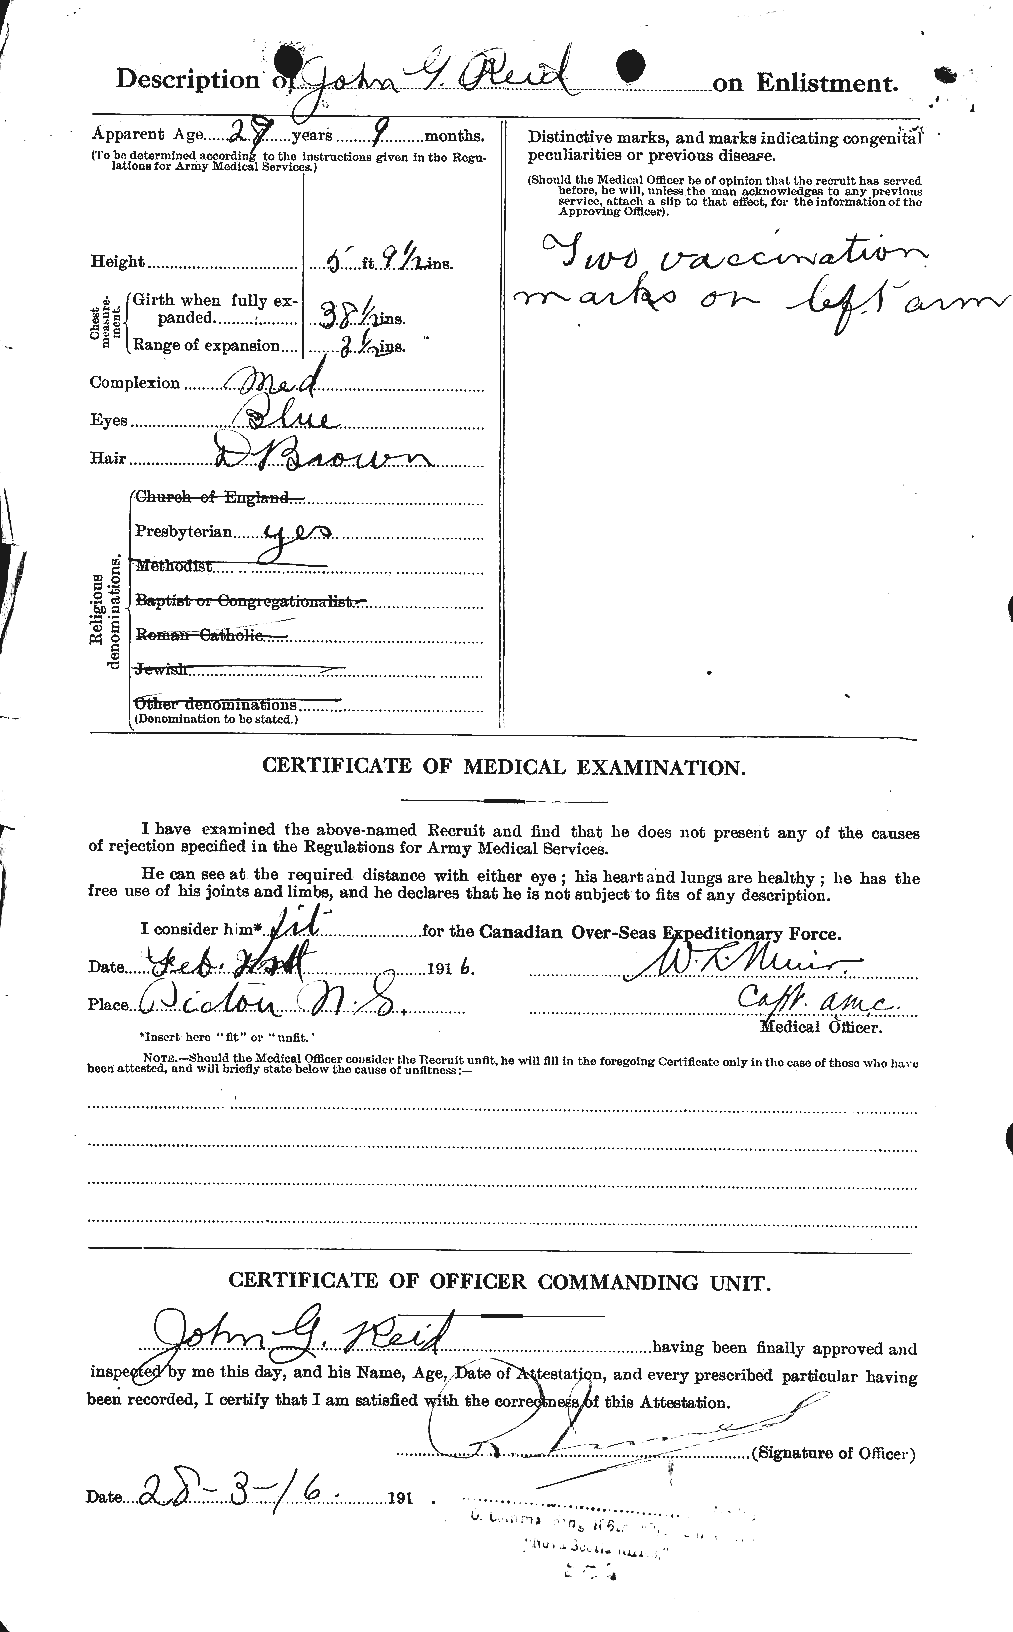 Personnel Records of the First World War - CEF 598842b